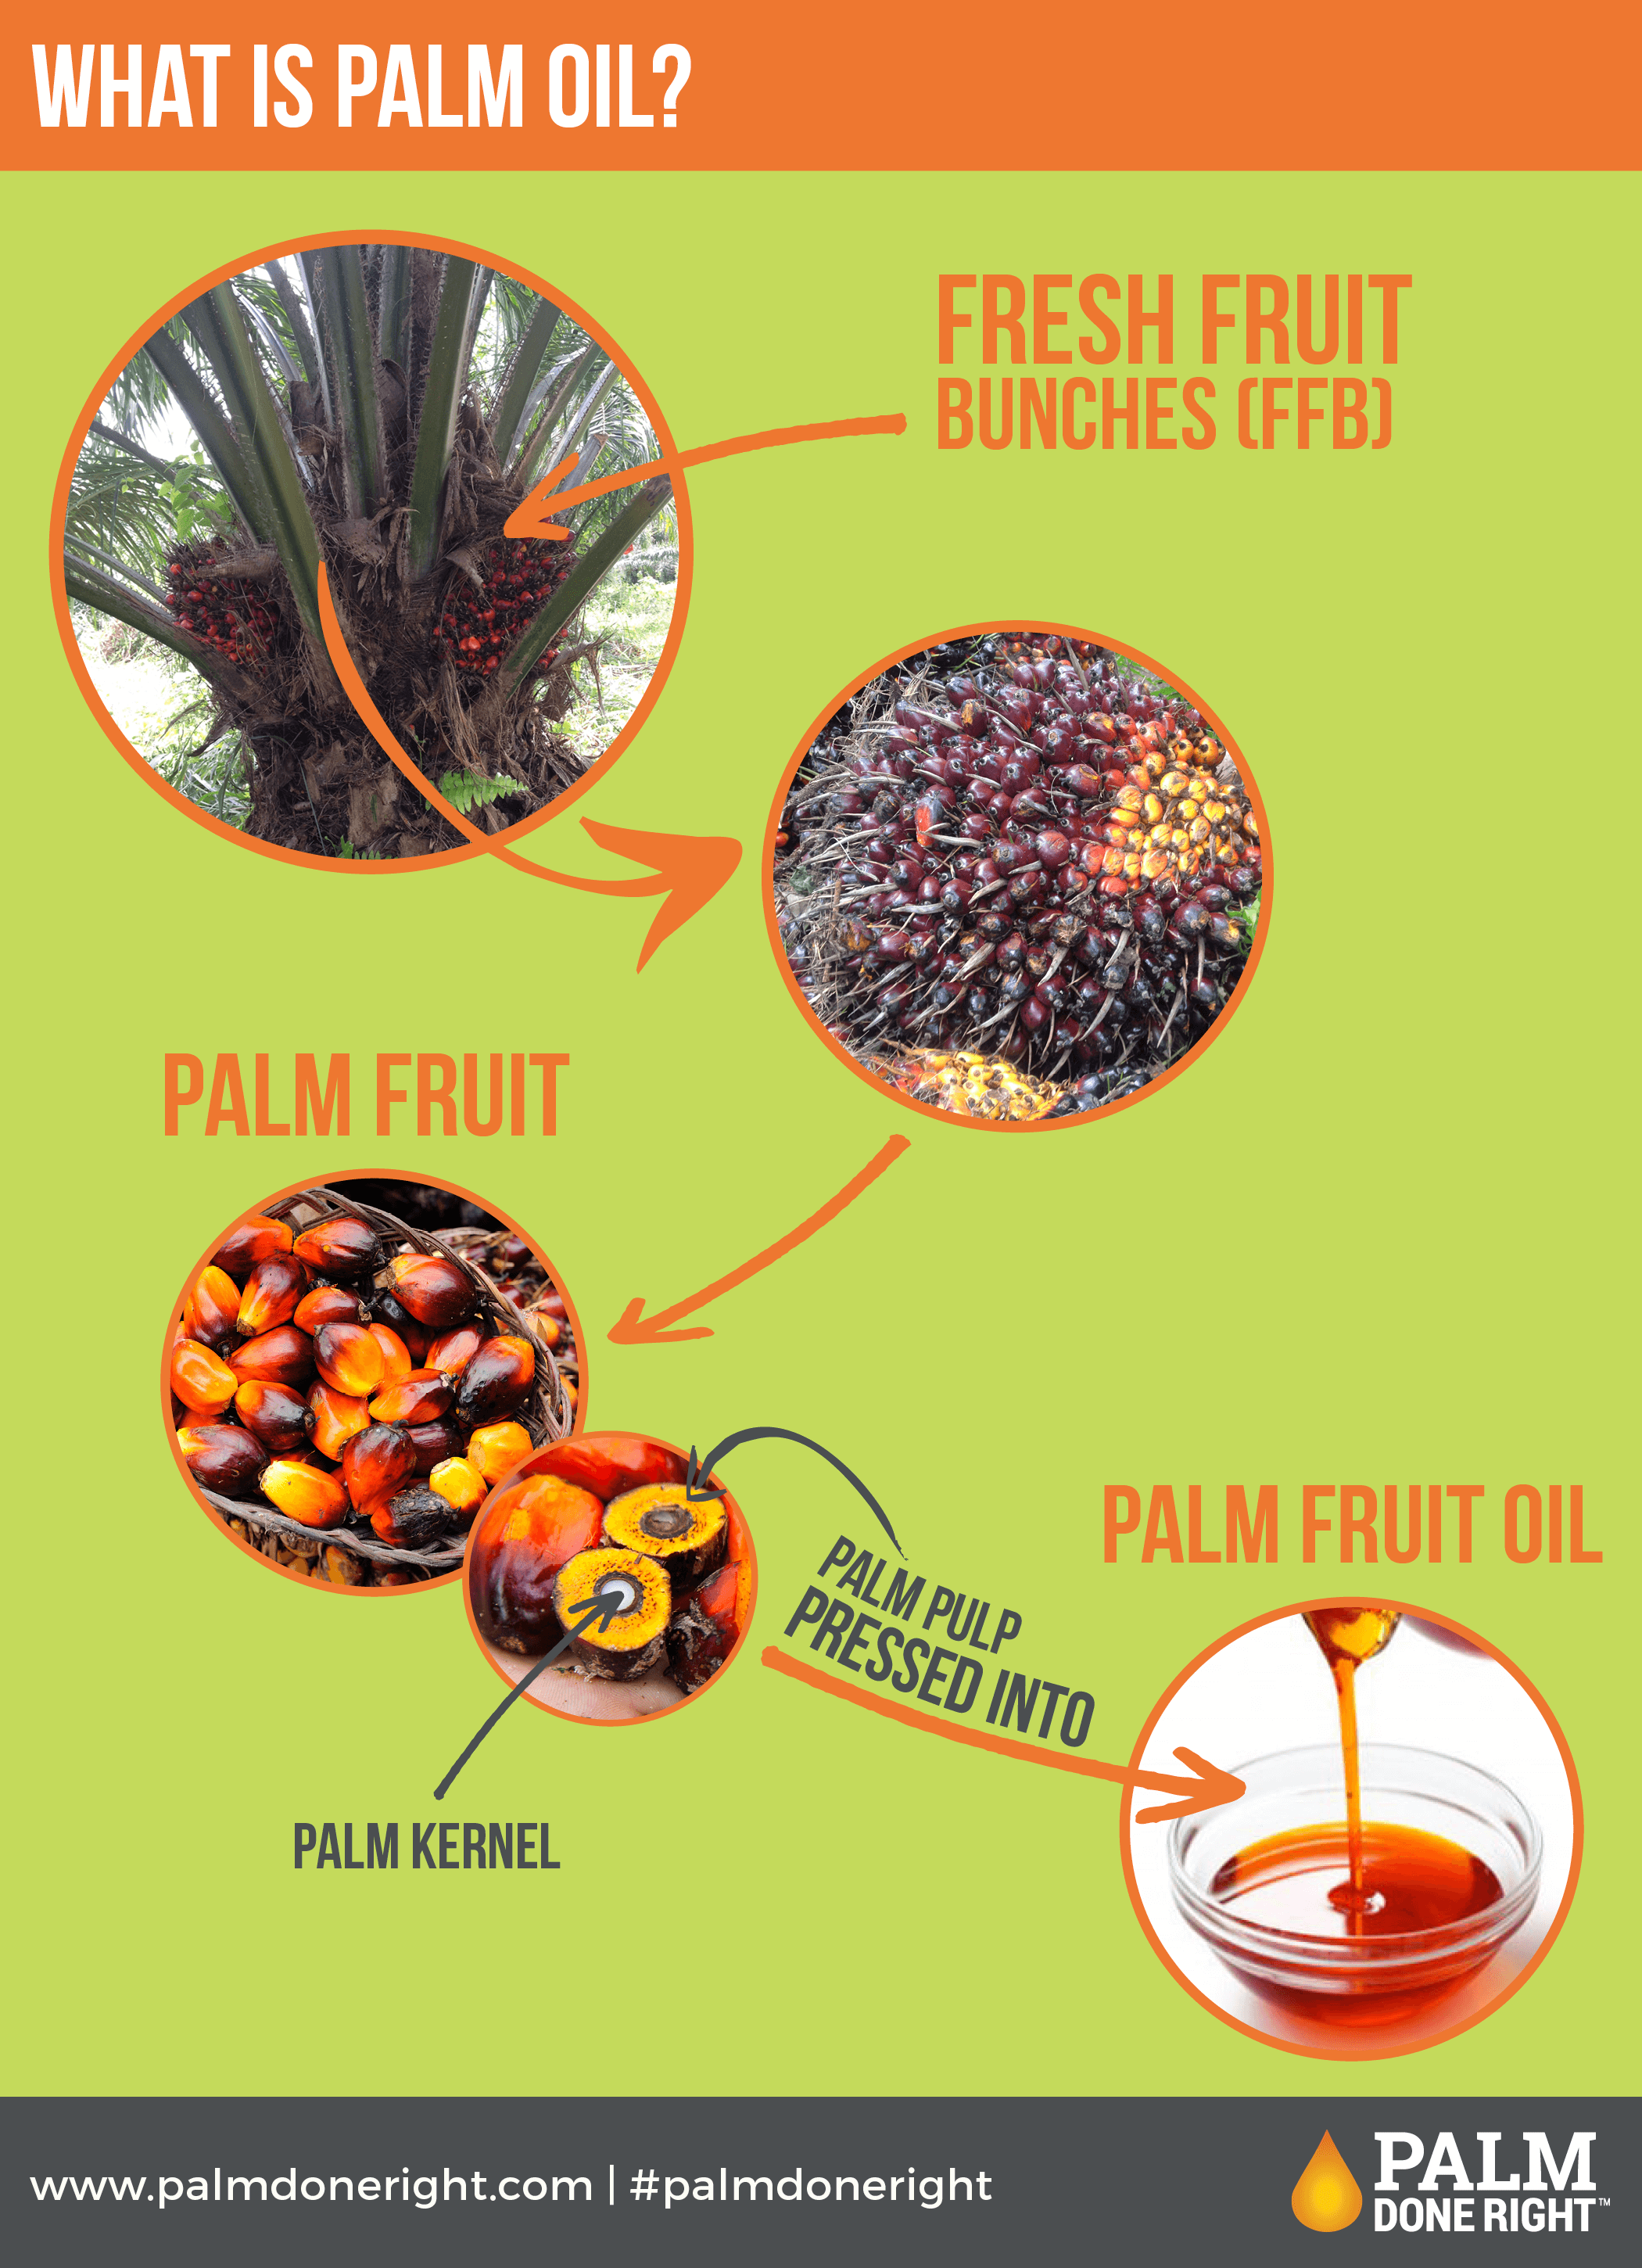 Responsibly sourced palm oil